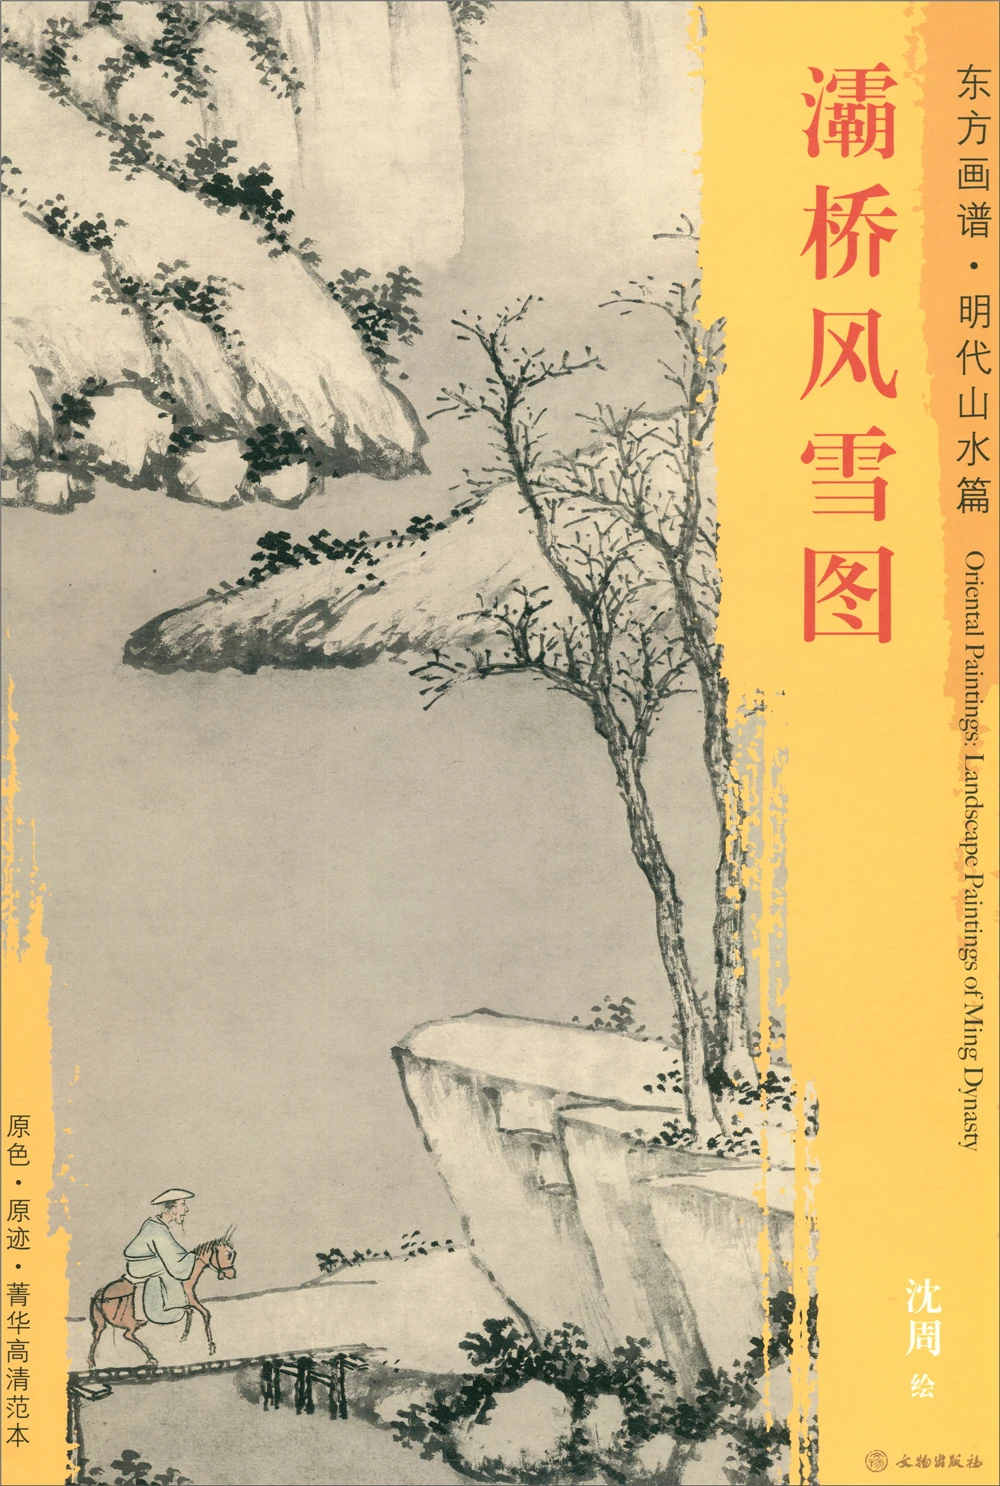 

Oriental Paintings. Landscapes of the Ming Dynasty, Baqiao Wind and Snow Sketch book Art Drawing Painting copyBook